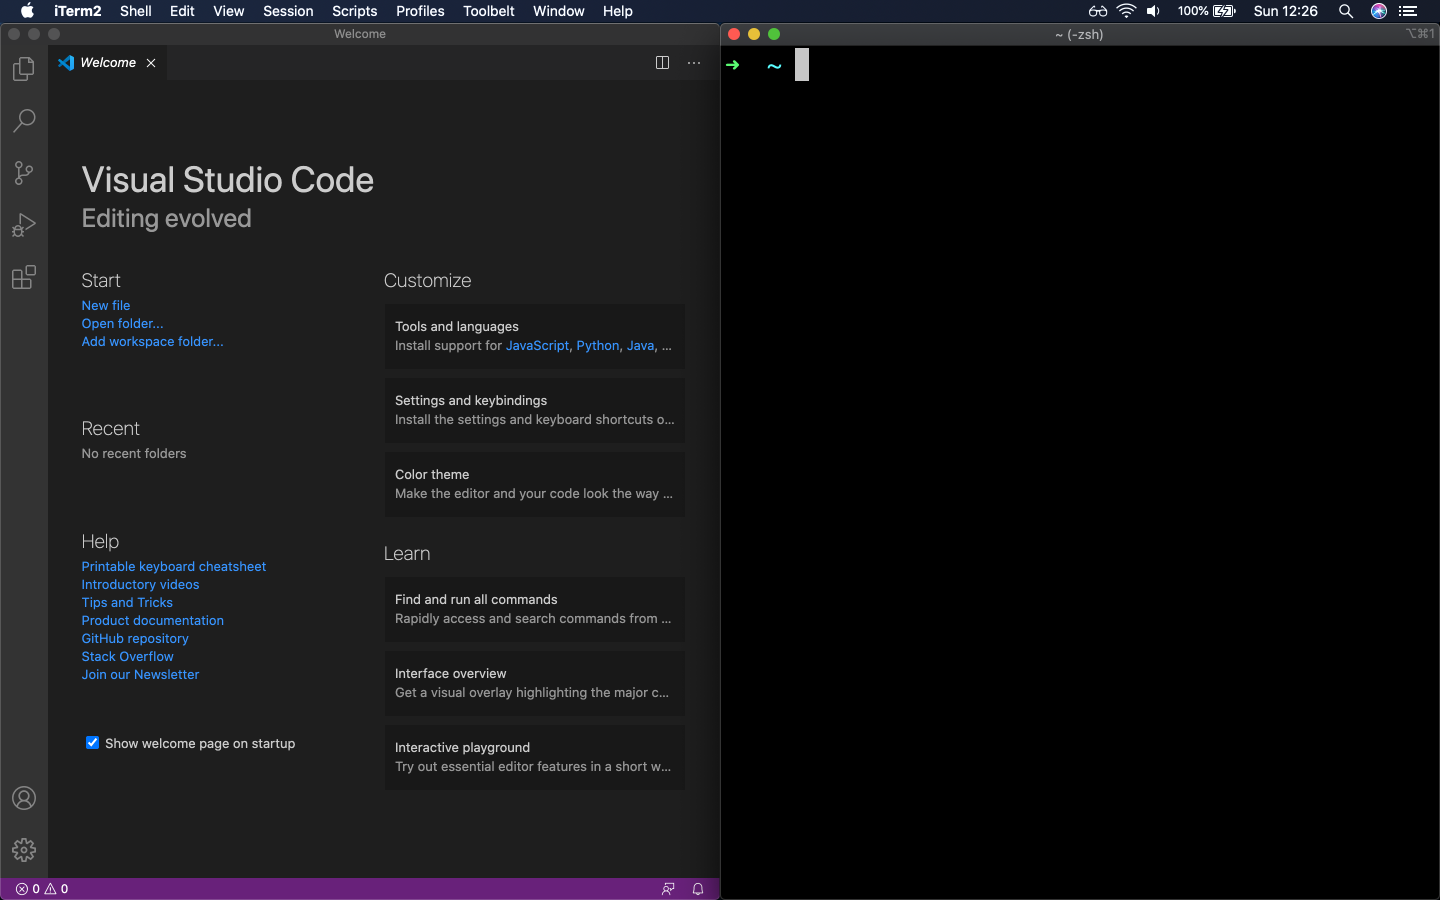 VSCode example as a Graphical User Interface